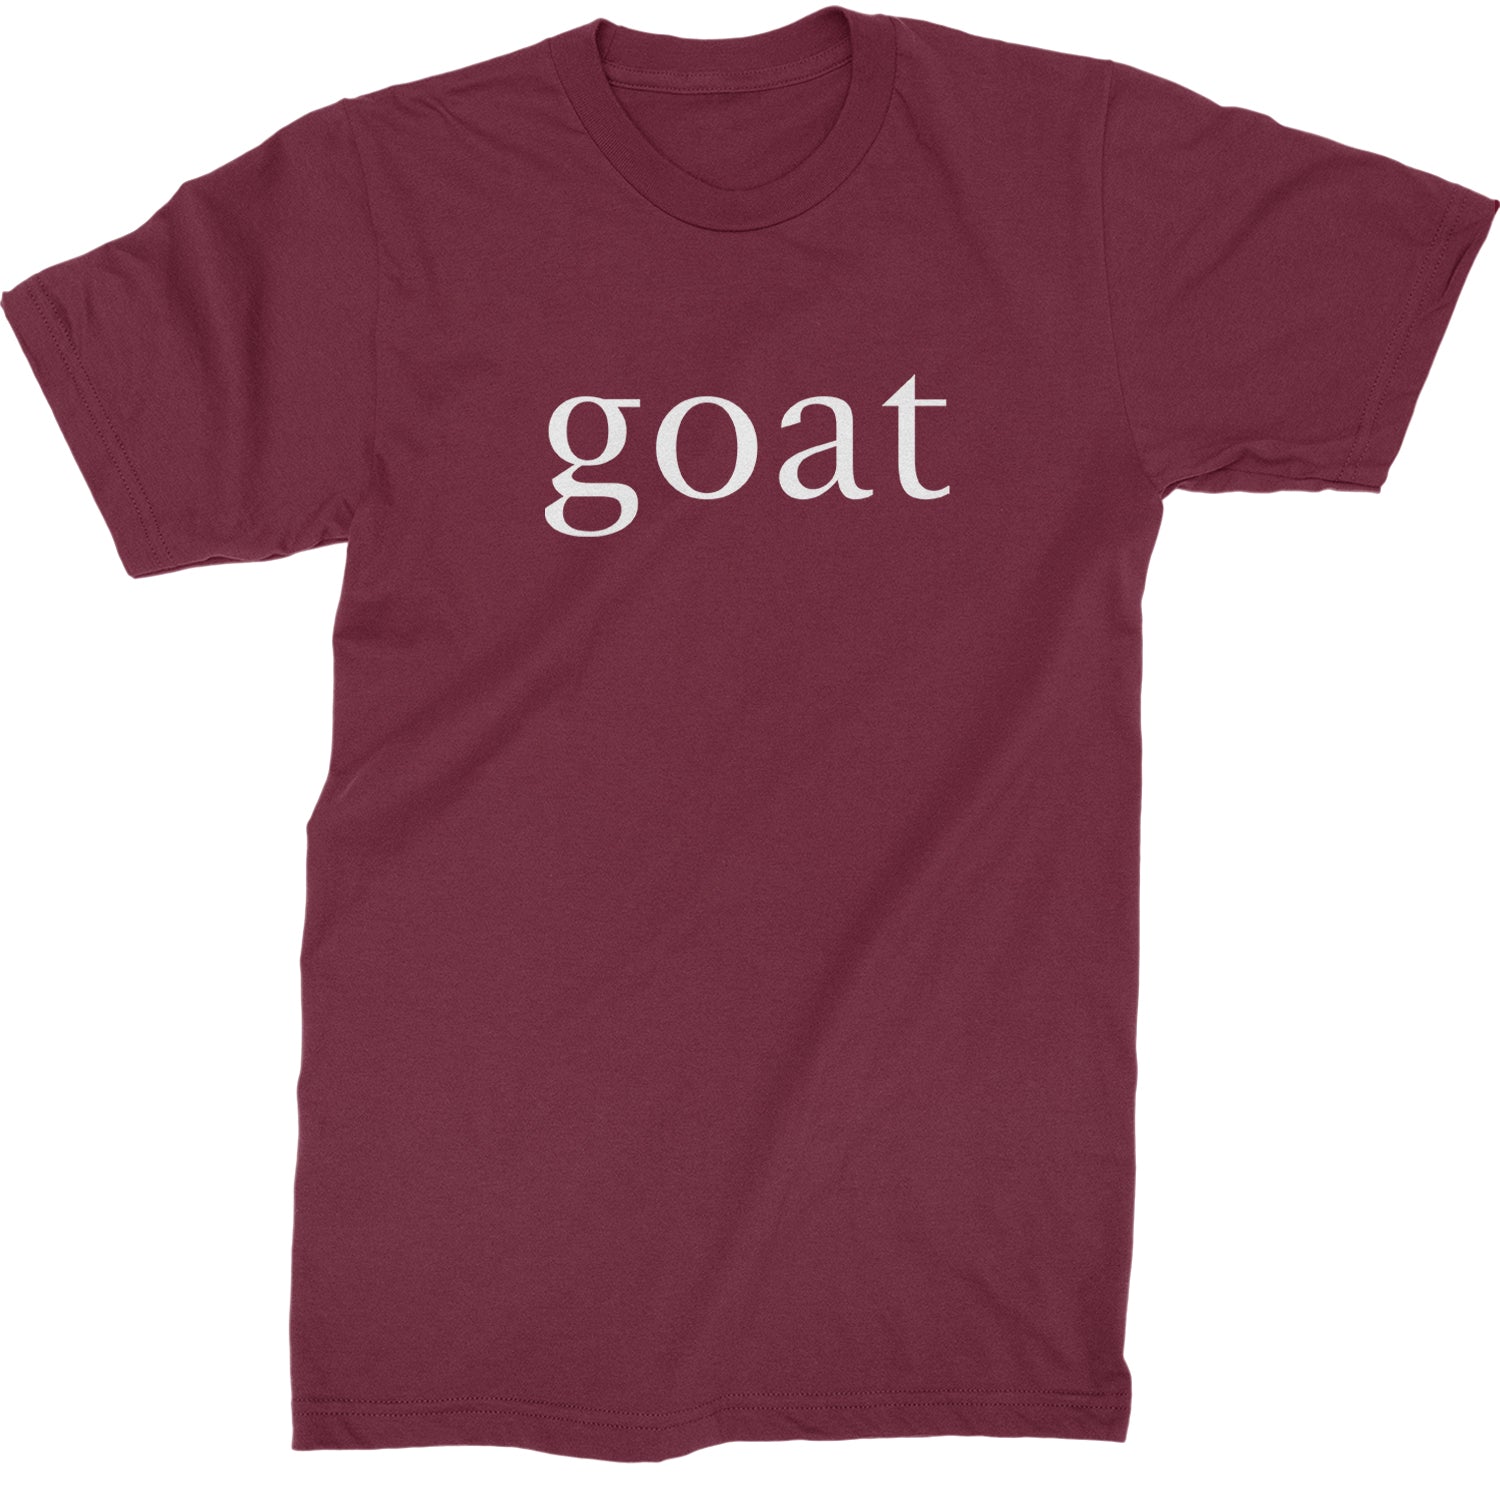 GOAT - Greatest Of All Time  Mens T-shirt Maroon